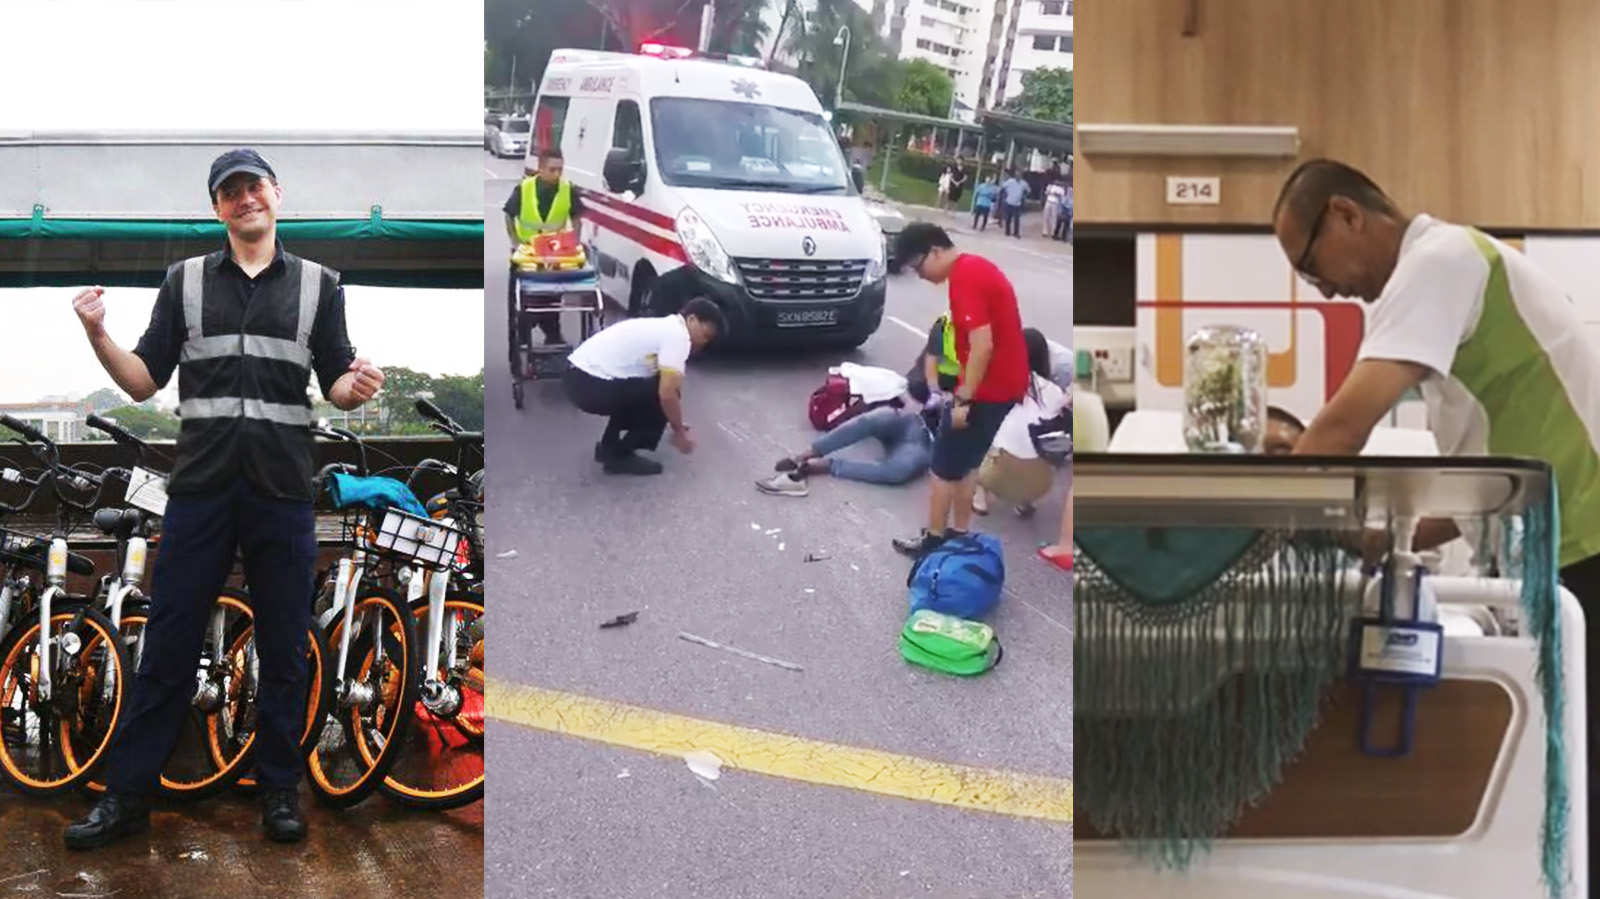 In 2017, these incidents in Singapore restored your faith in humanity